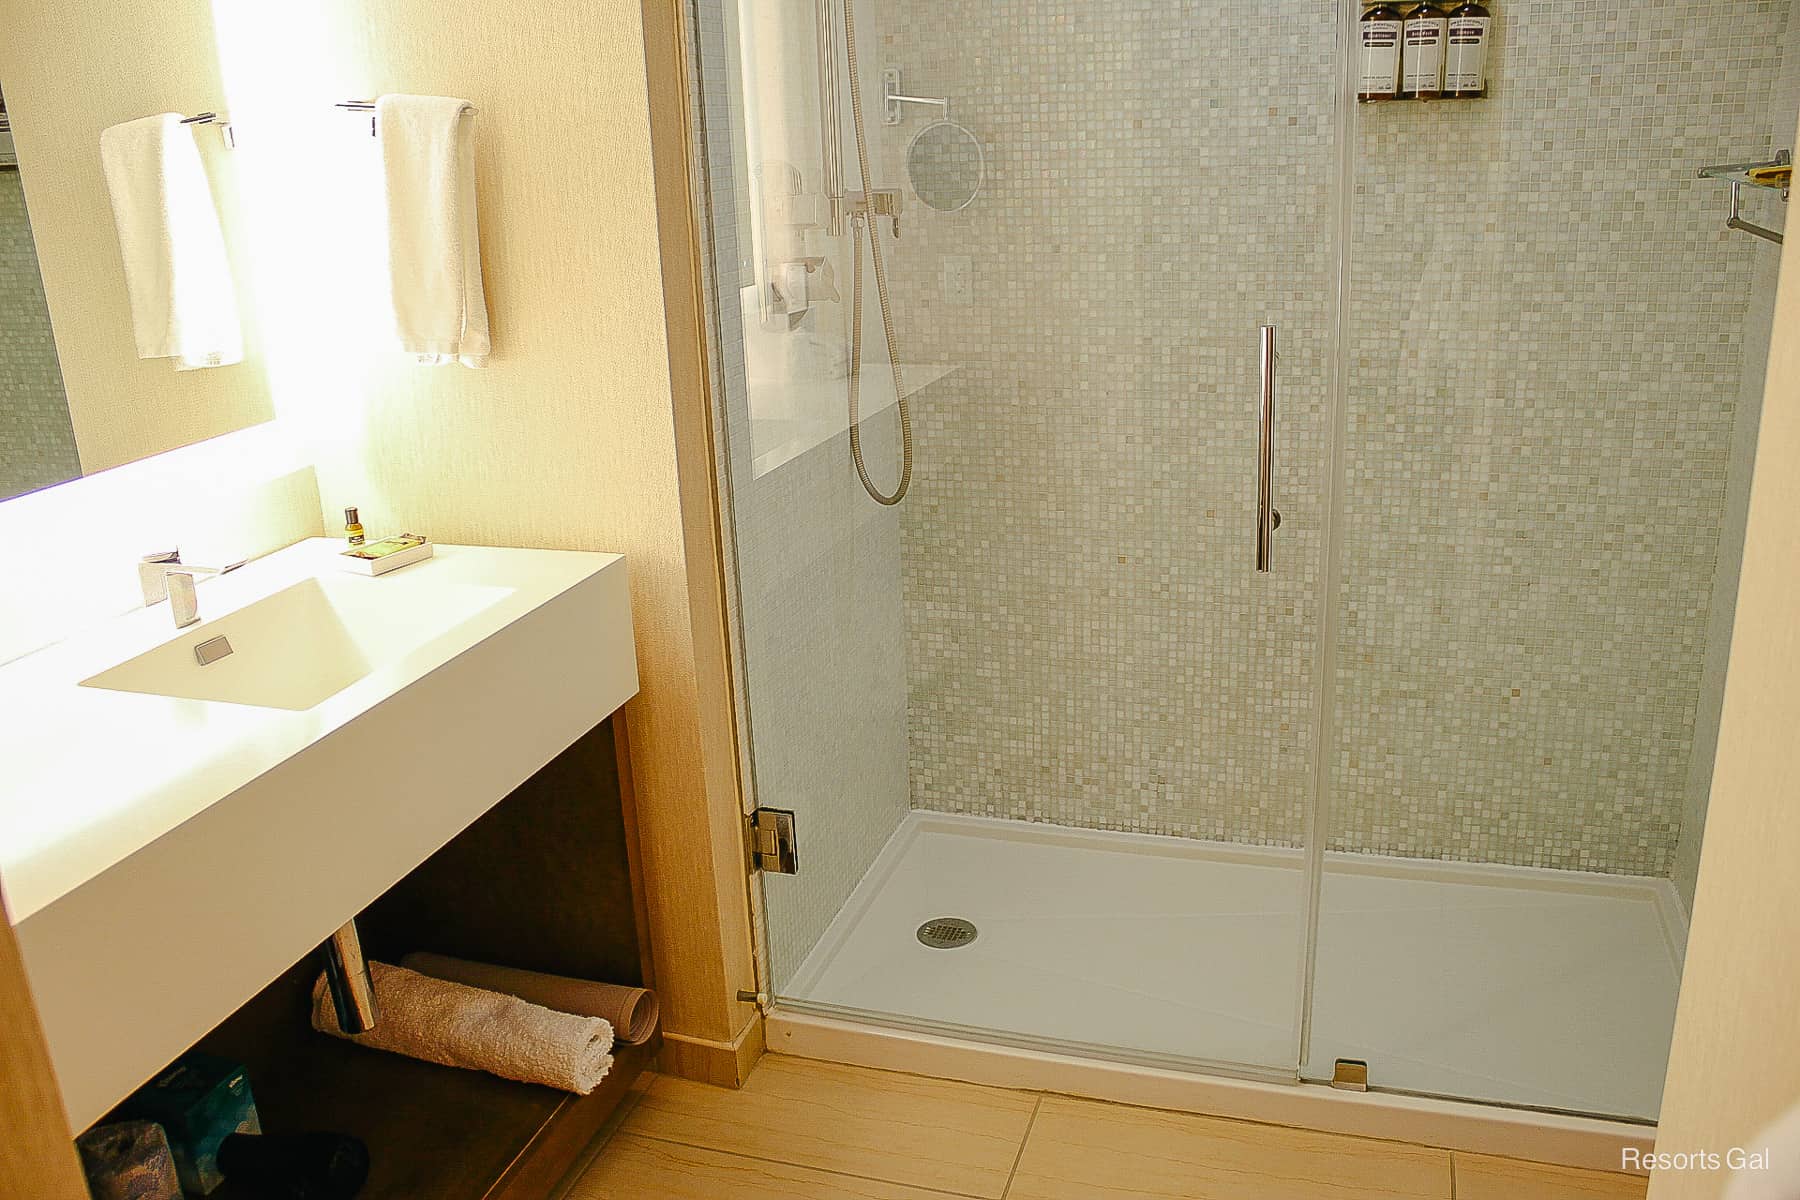 walk-in shower with glass door and mosaic tile design 